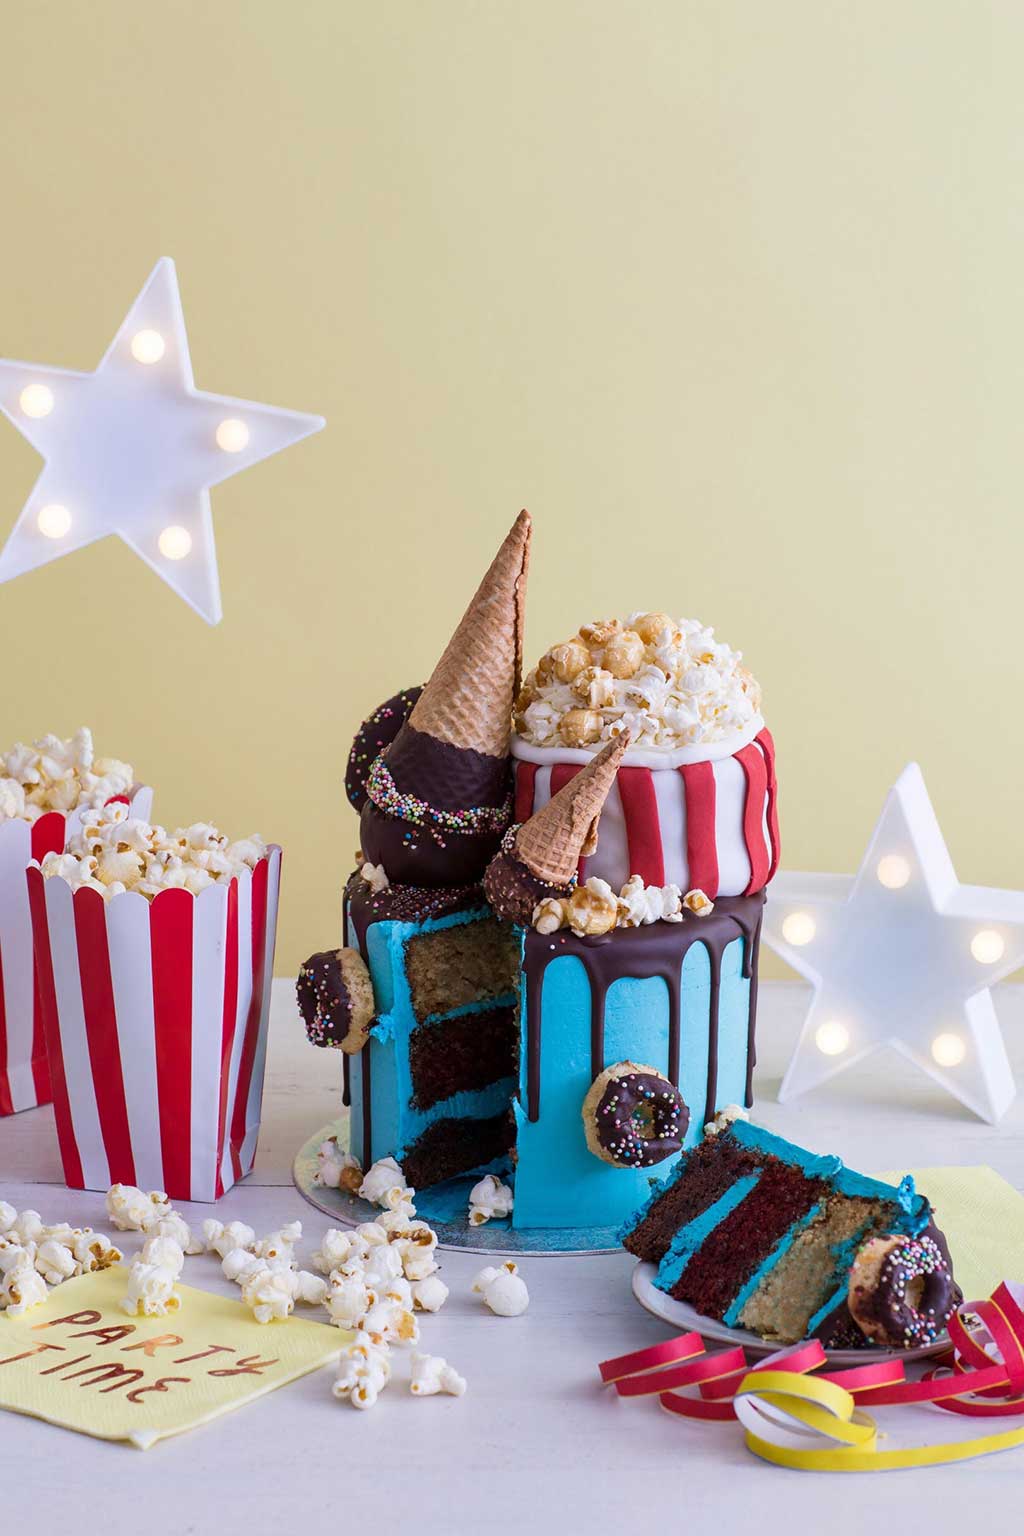 Seven Tips for Throwing the Ultimate Kids' Party: From Themes to Treats!